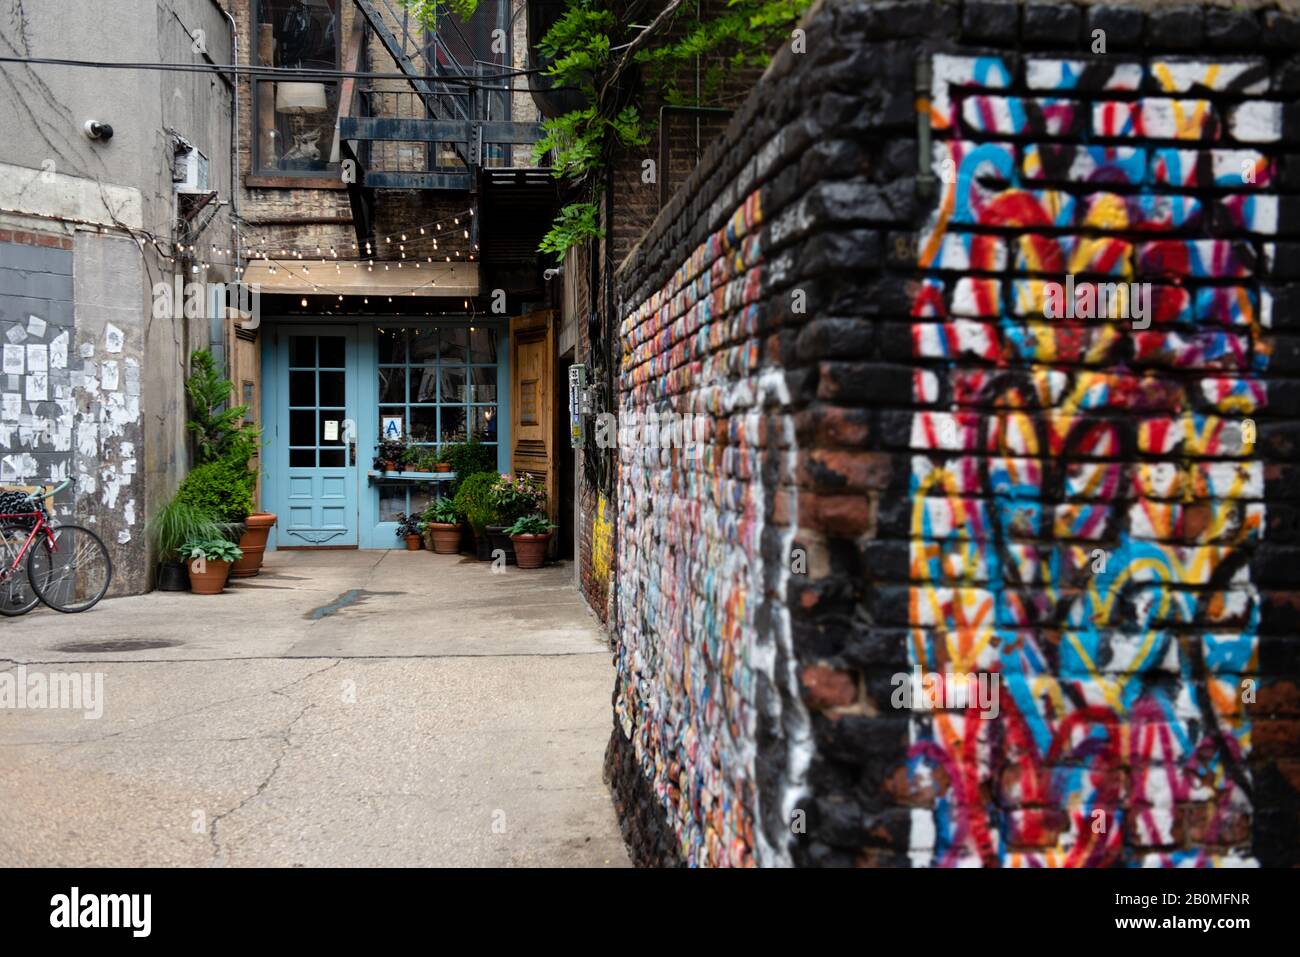 A mural of hearts are spray painted on a brick wall in an alley leading to Freemans Restaurant on the Lower East side of New York City. Stock Photo